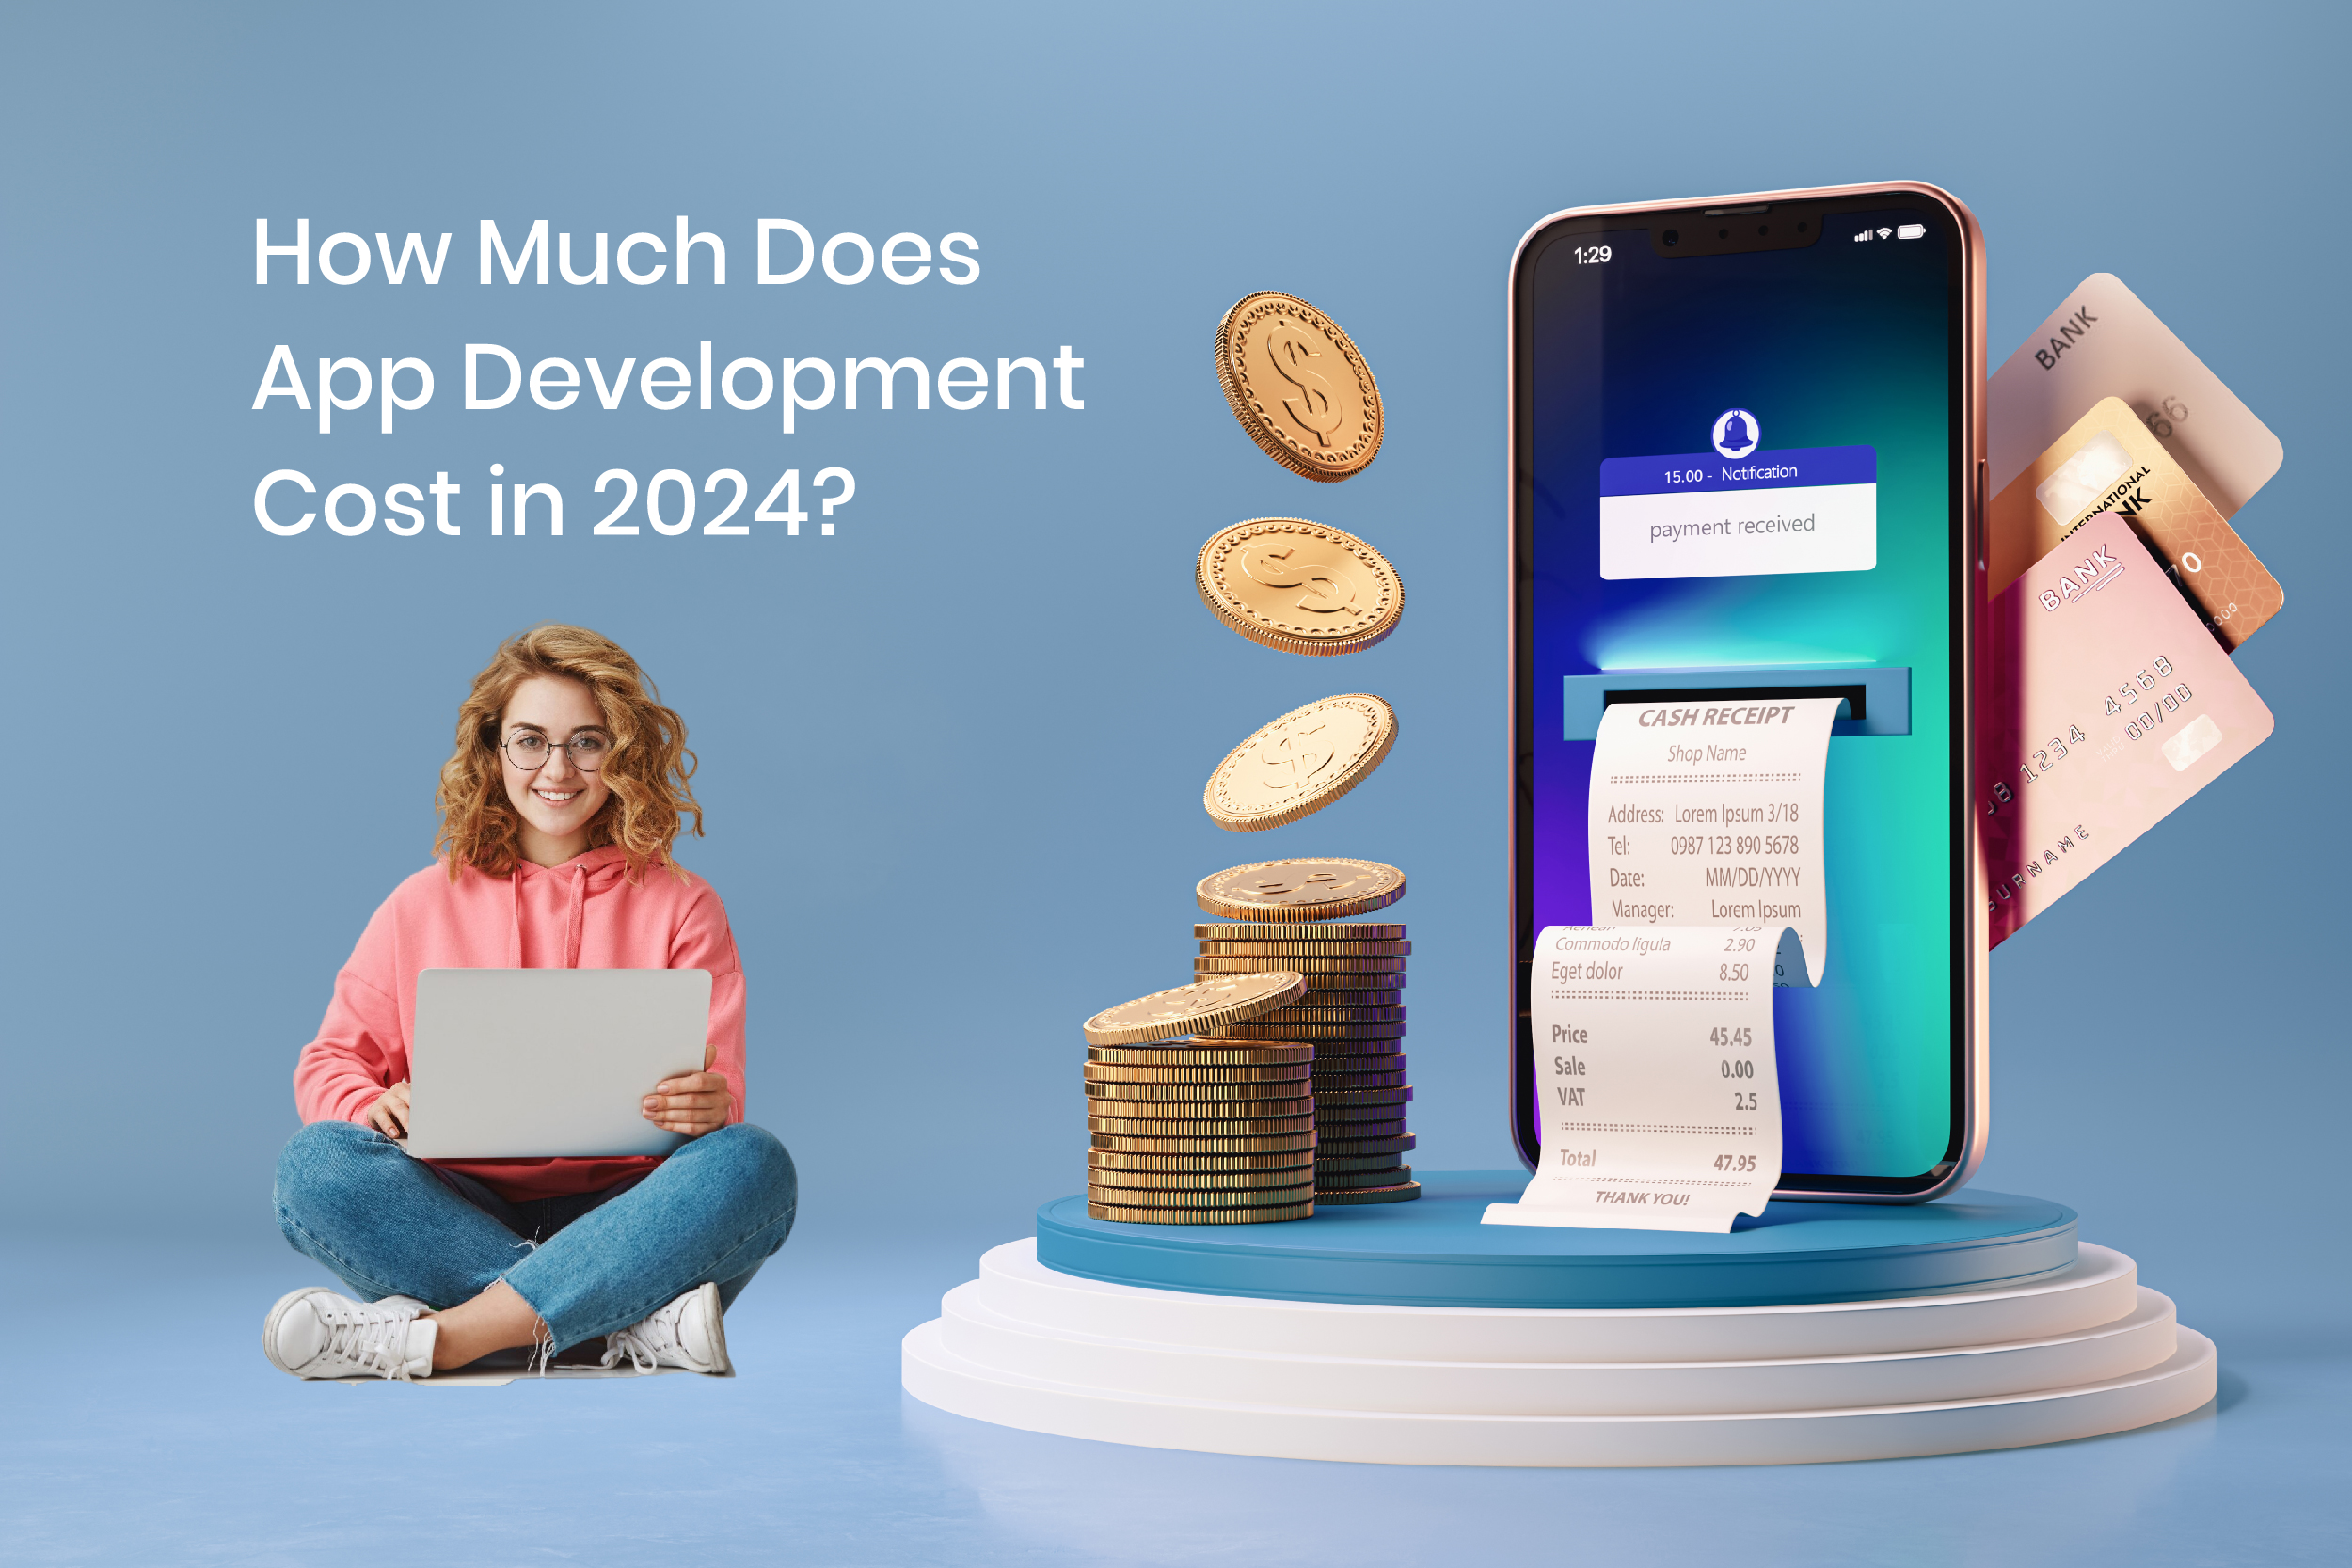 How Much Does App Development Cost in 2024 